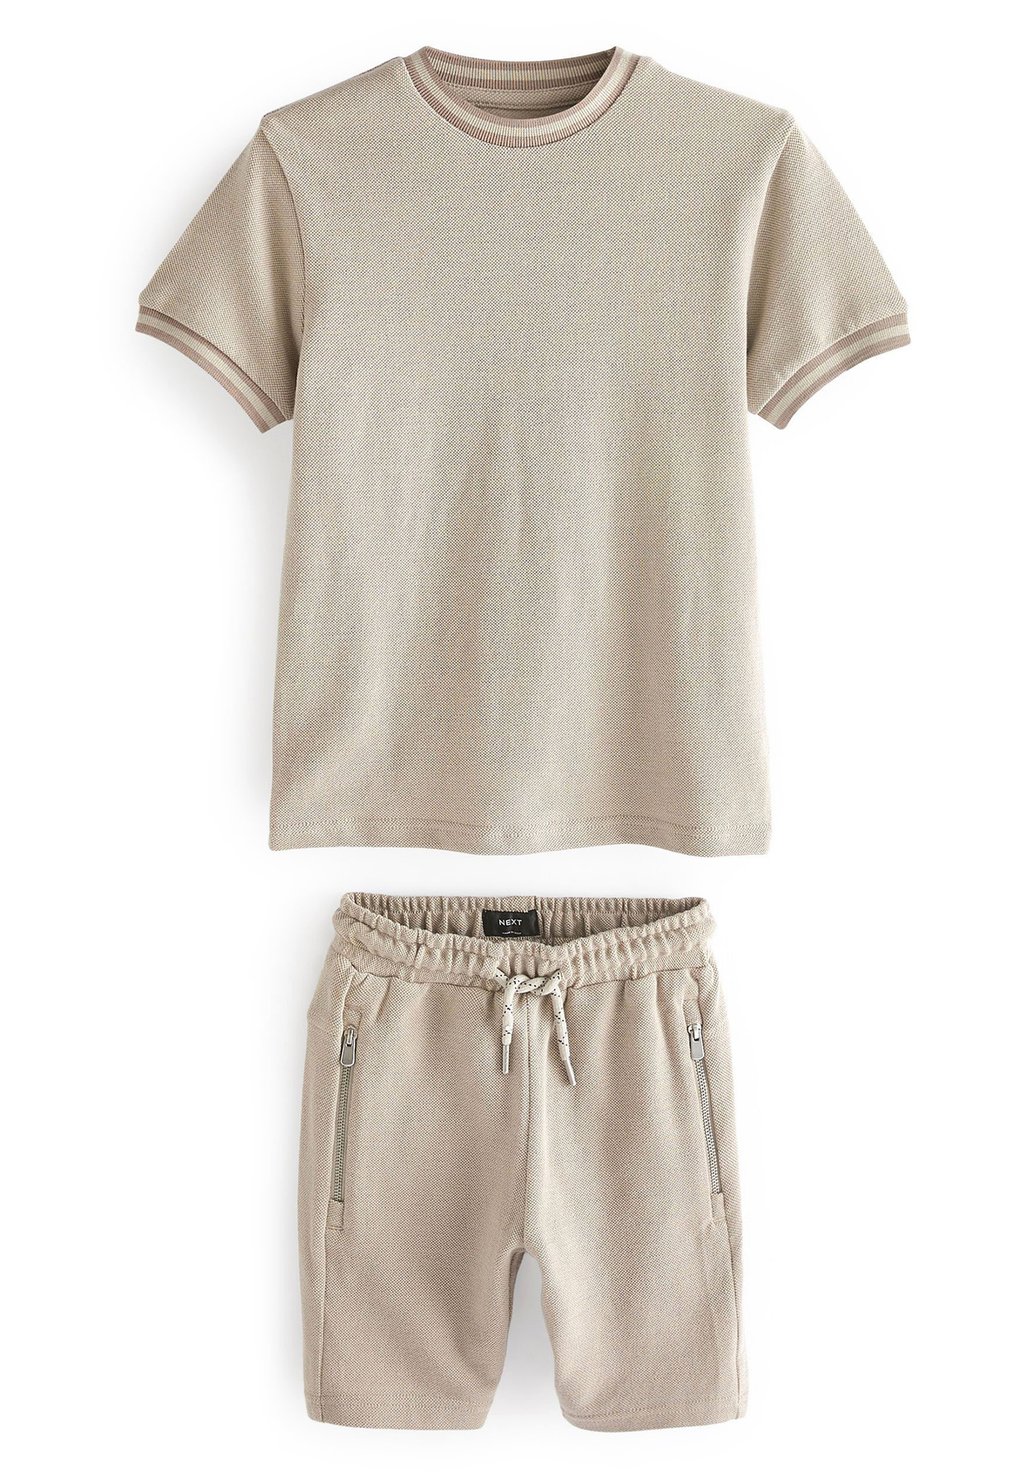 Шорты TEXTURED T-SHIRT AND SHORTS SET Next, цвет cement stone шорты all over printed t shirt and shorts license set next цвет neutral tan mickey mouse